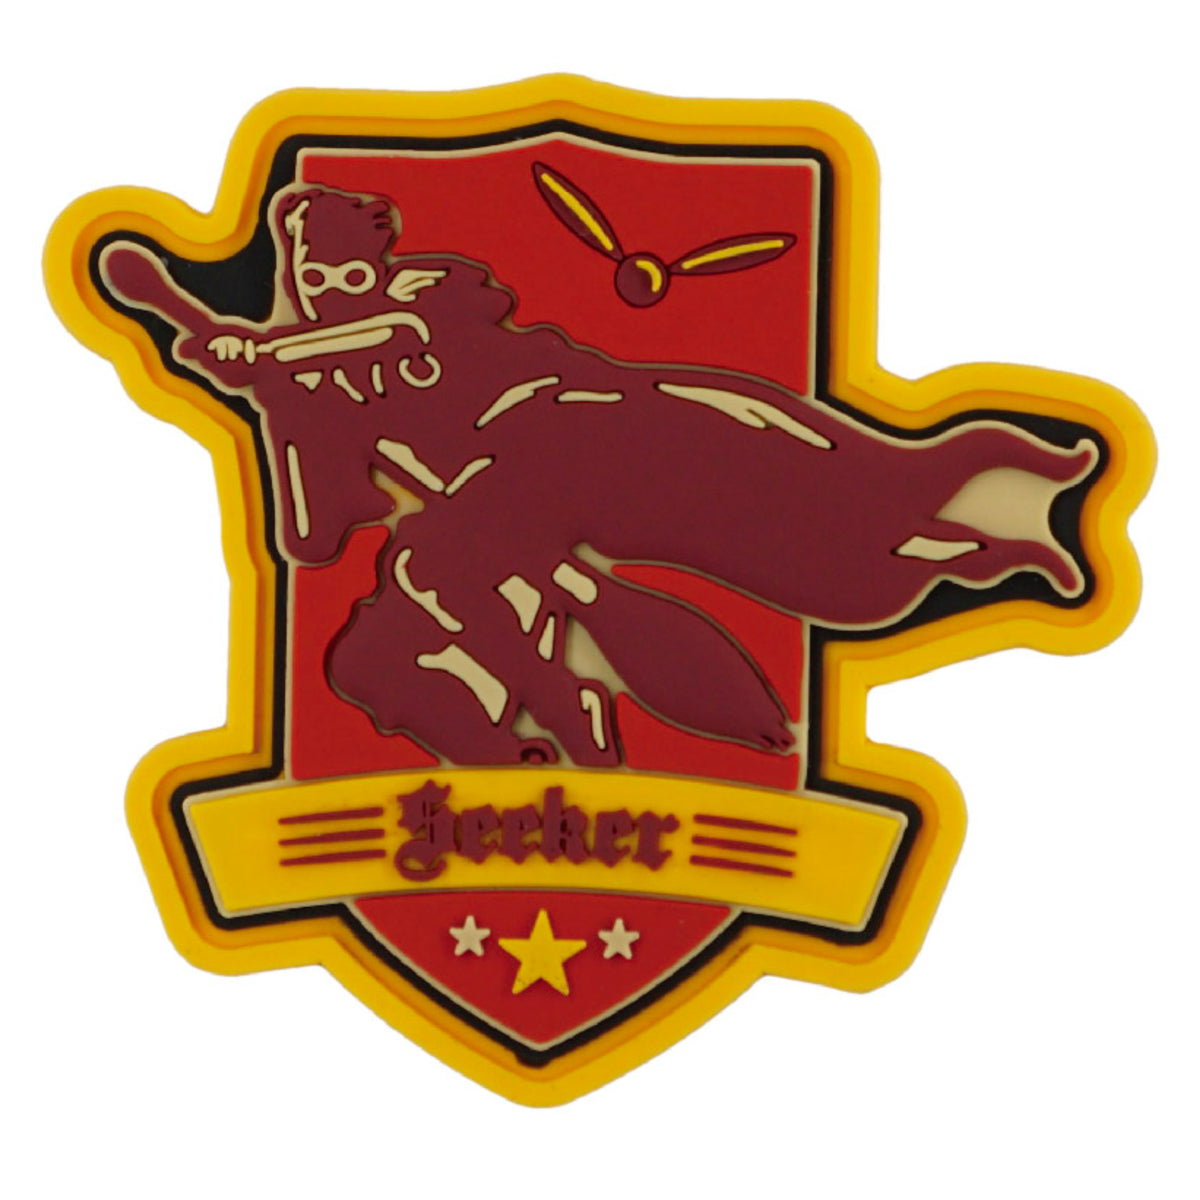 Seeker Quidditch Team Patch Soft Touch PVC Magnet